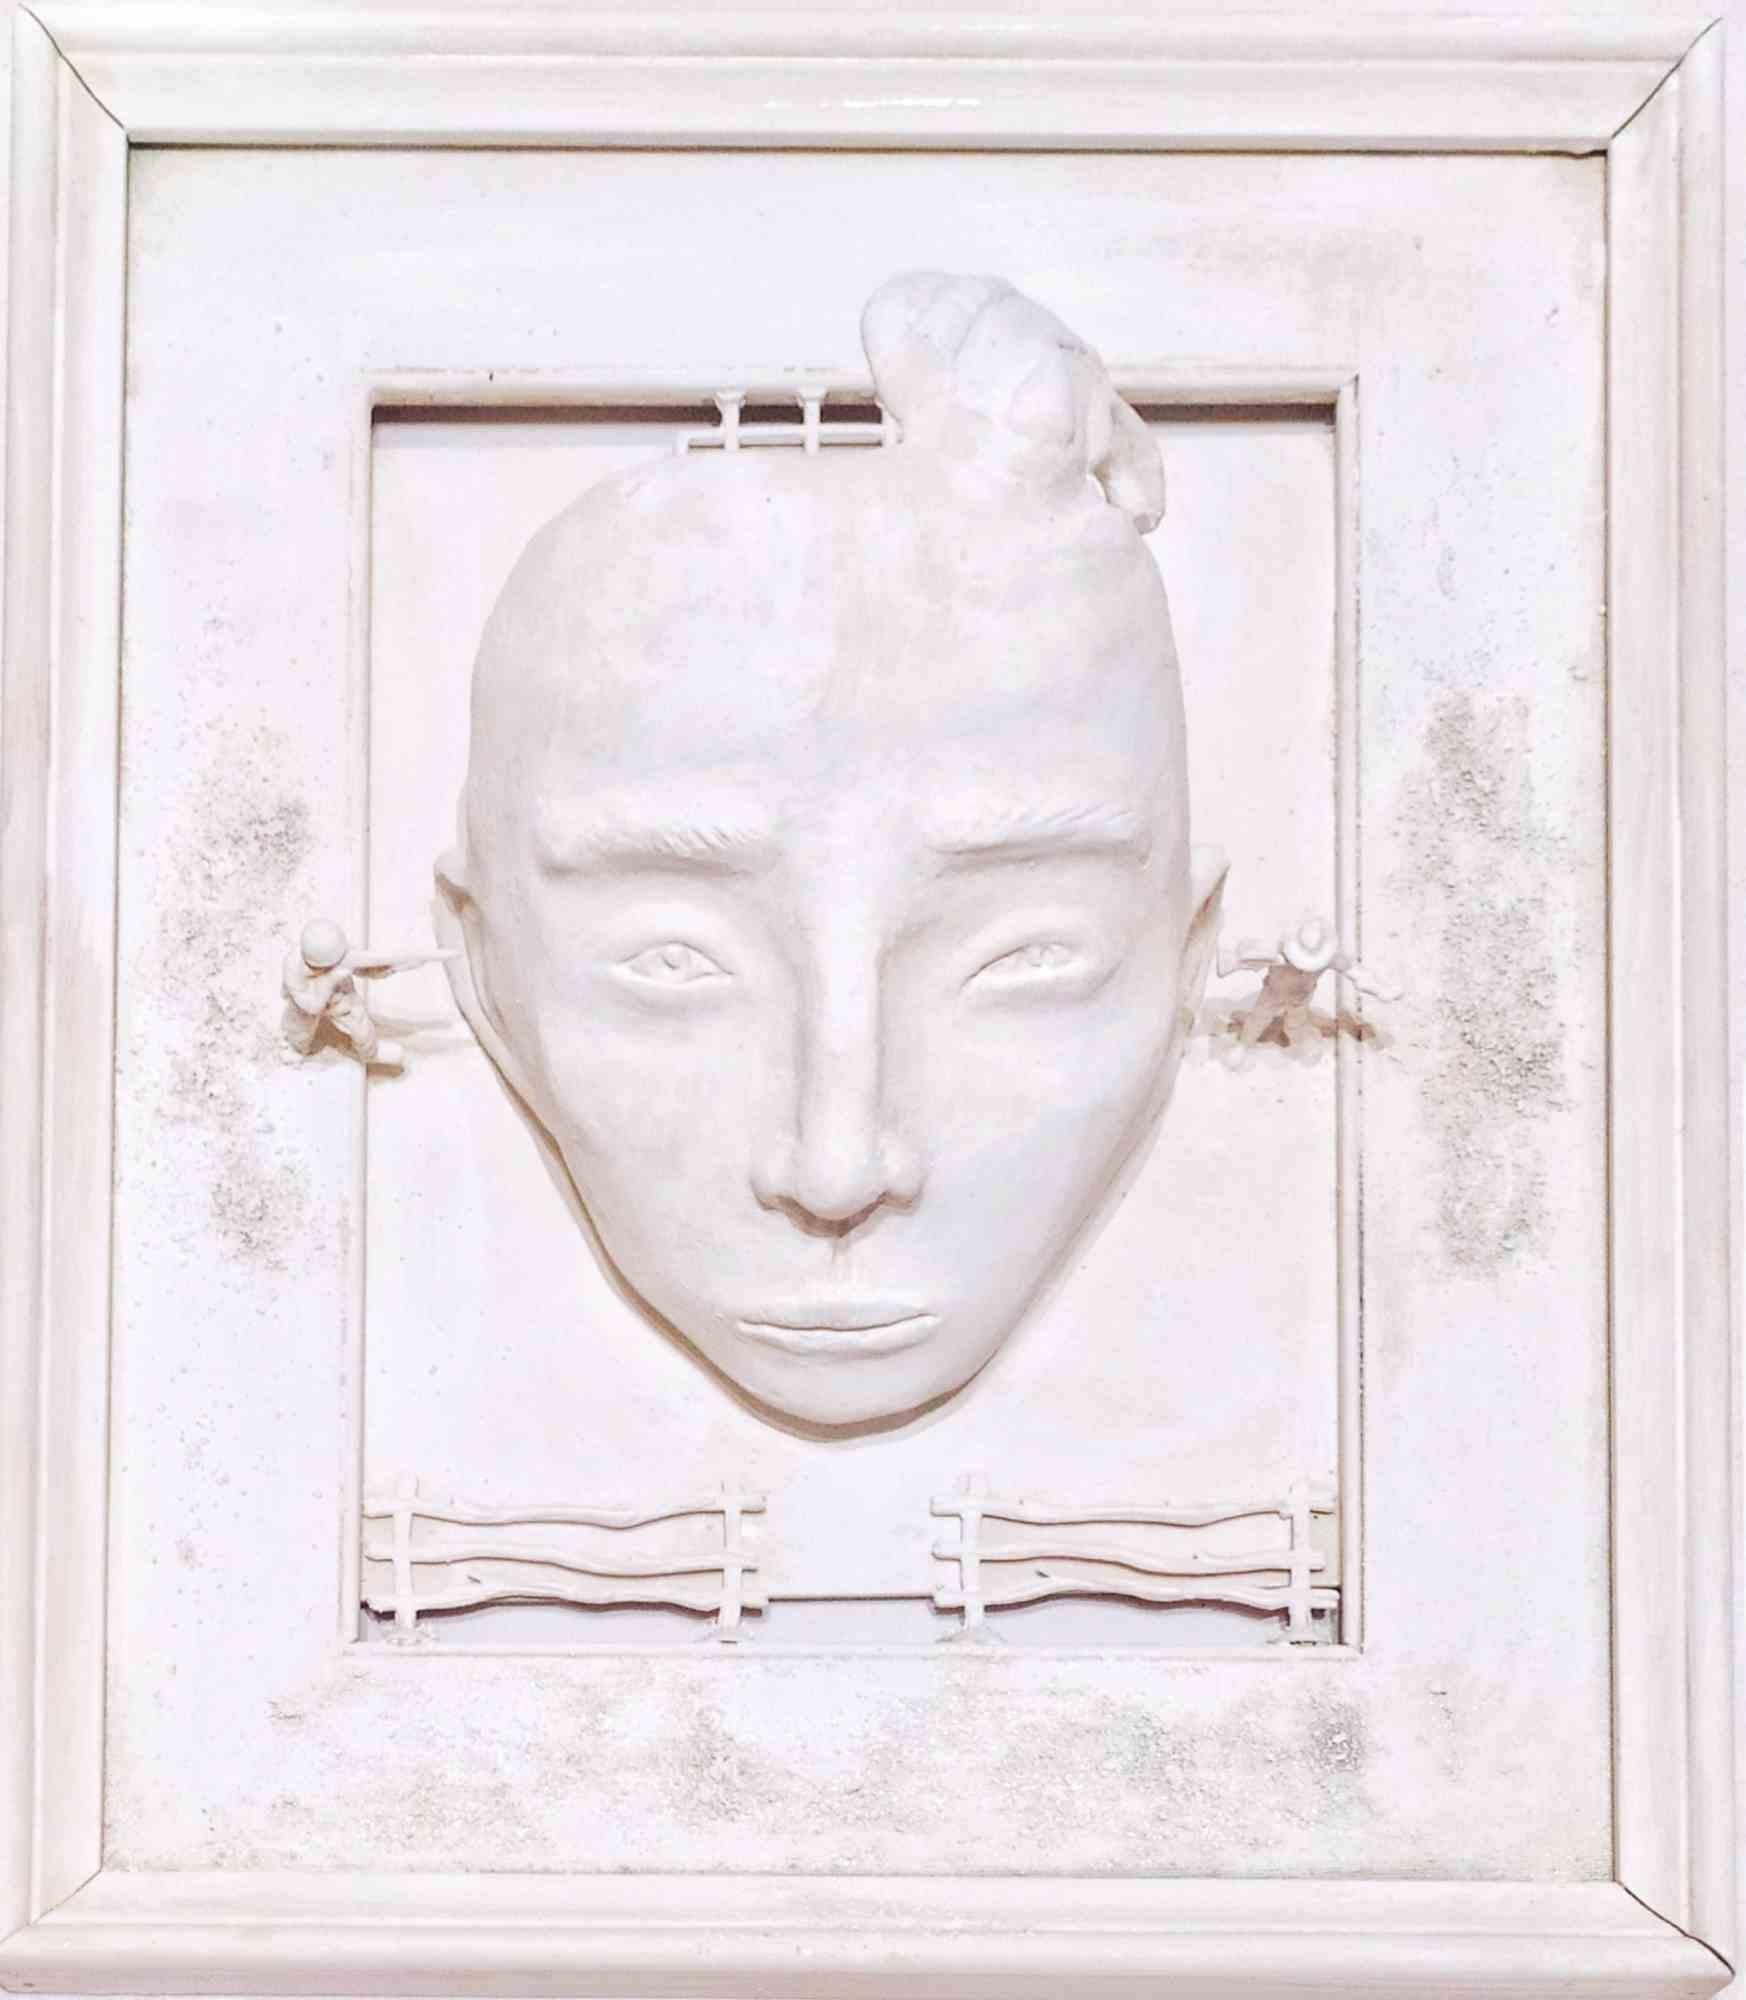 Mixed media realized by Lisartventure.

The work is modeled by hand in plaster paste assembled n a wooden frame. It was realized in 2023 in Turin.